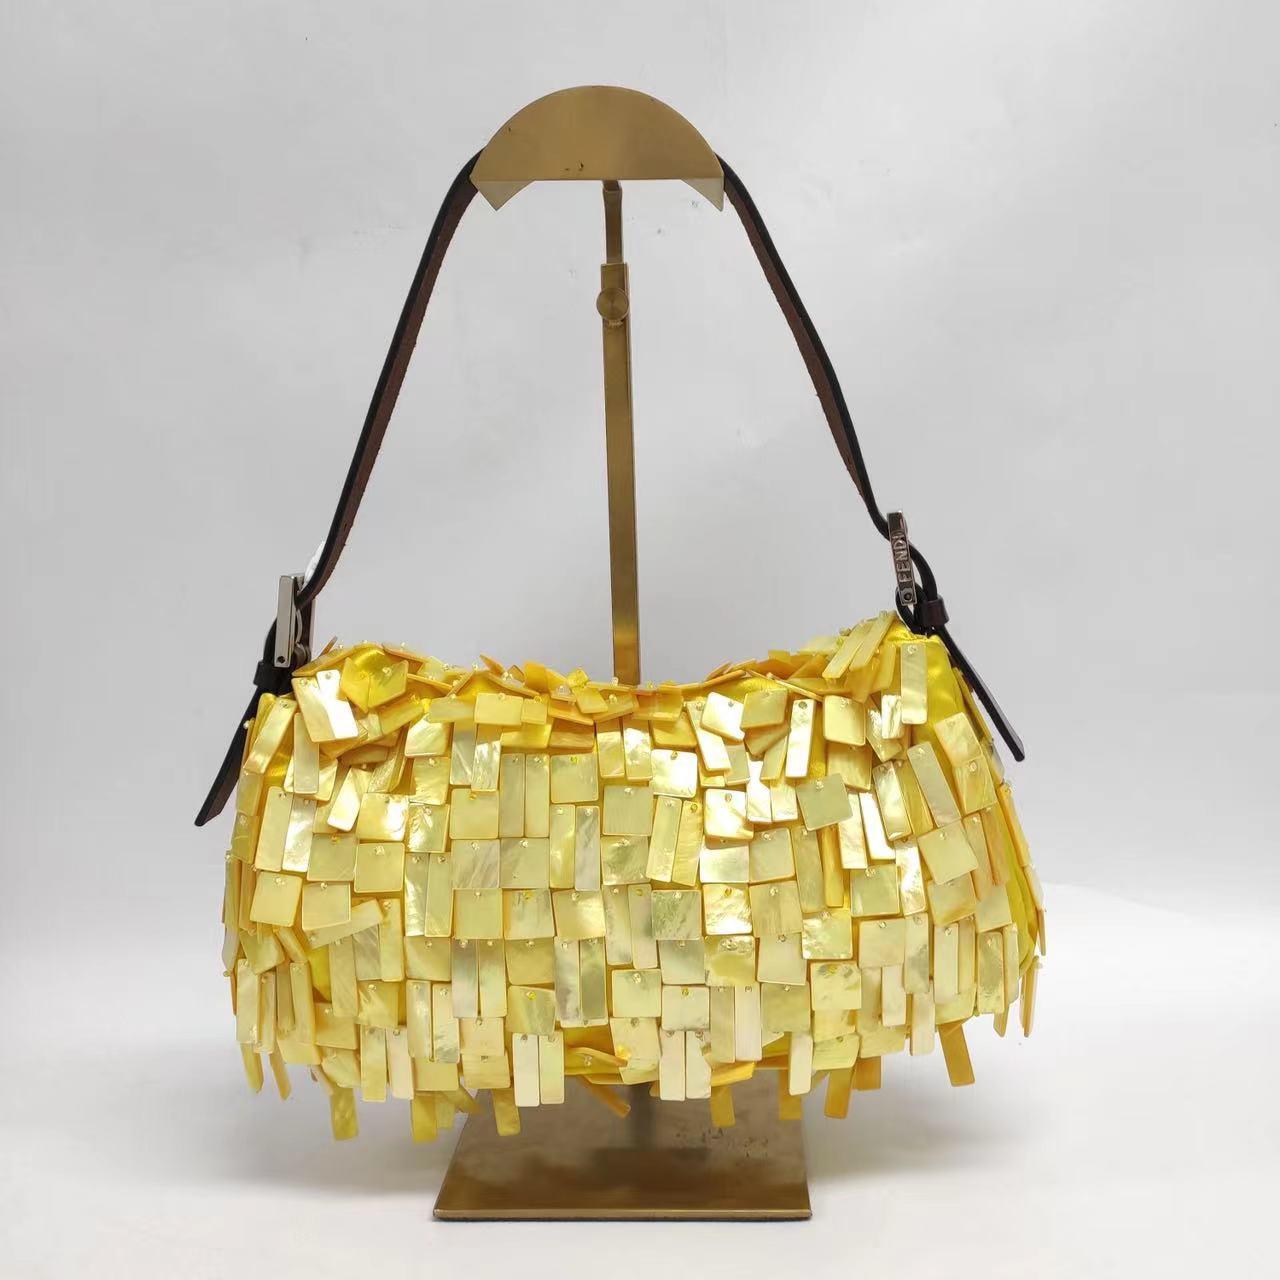 Make a statement with this bold, ultra-rare Fendi Baguette. Boasting yellow silk and a dazzling display of mother-of-pearl sequins, it'll take your look to the next level with its daring style! Be a fashion icon today!

Very good condition. Most